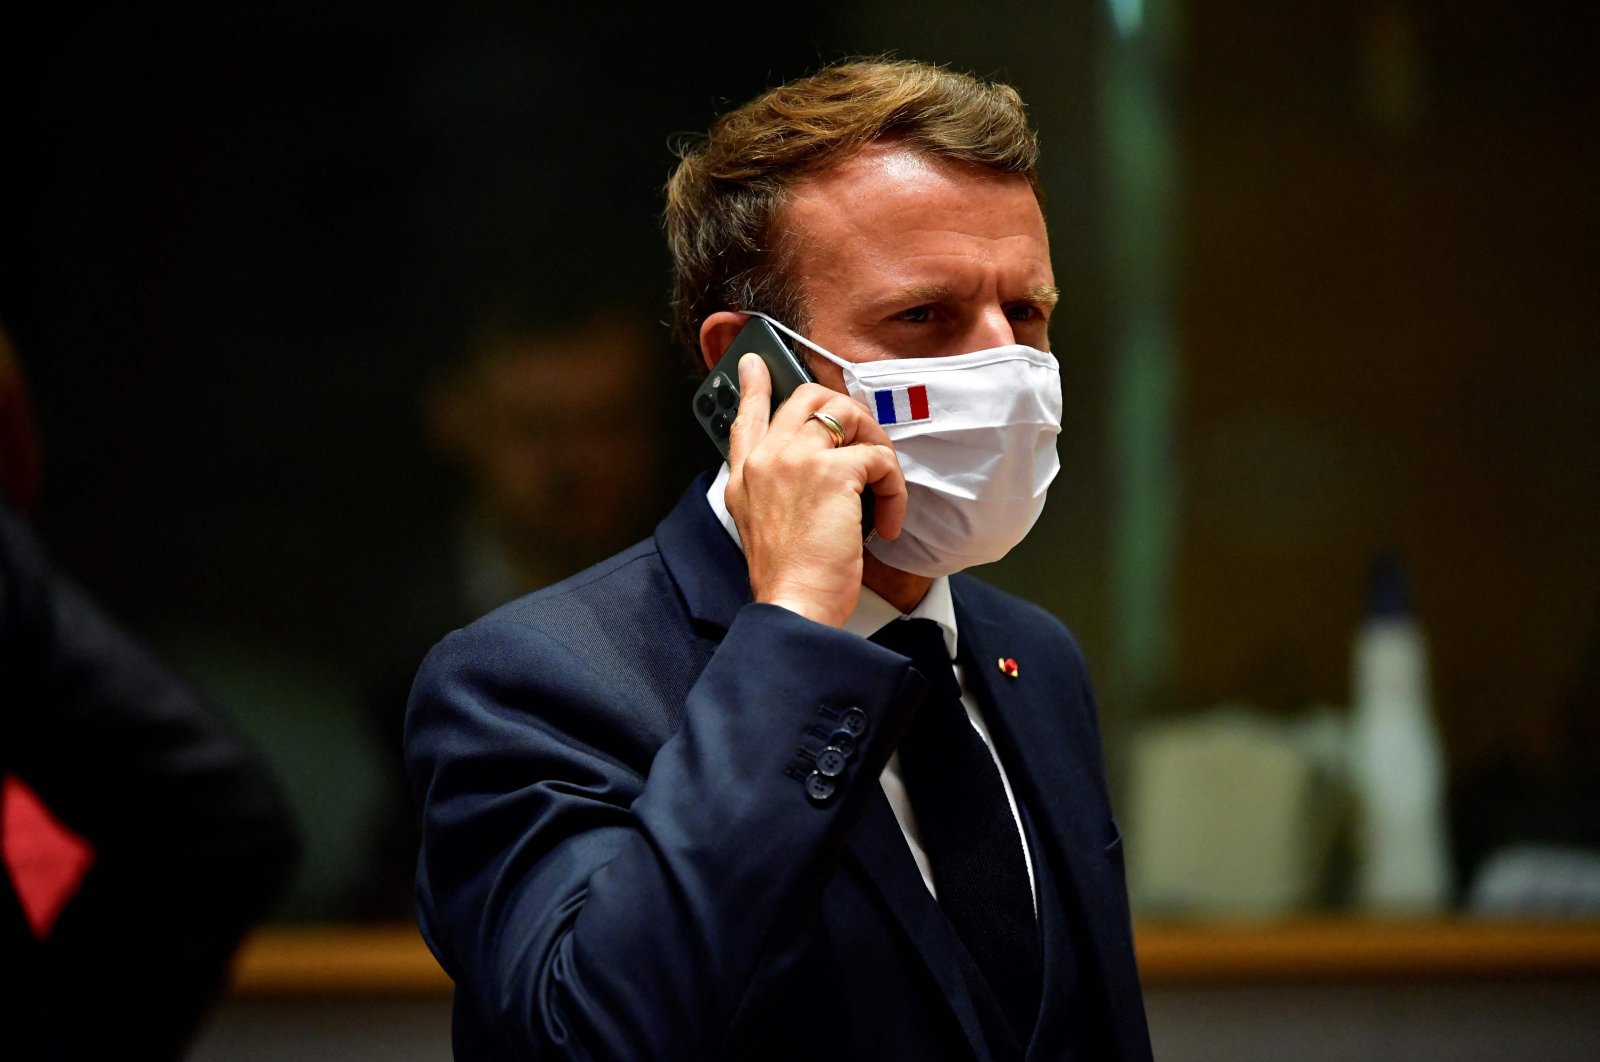 French President Emmanuel Macron speaks on the phone during an EU summit in Brussels, Belgium, July 20, 2021. (AFP Photo)